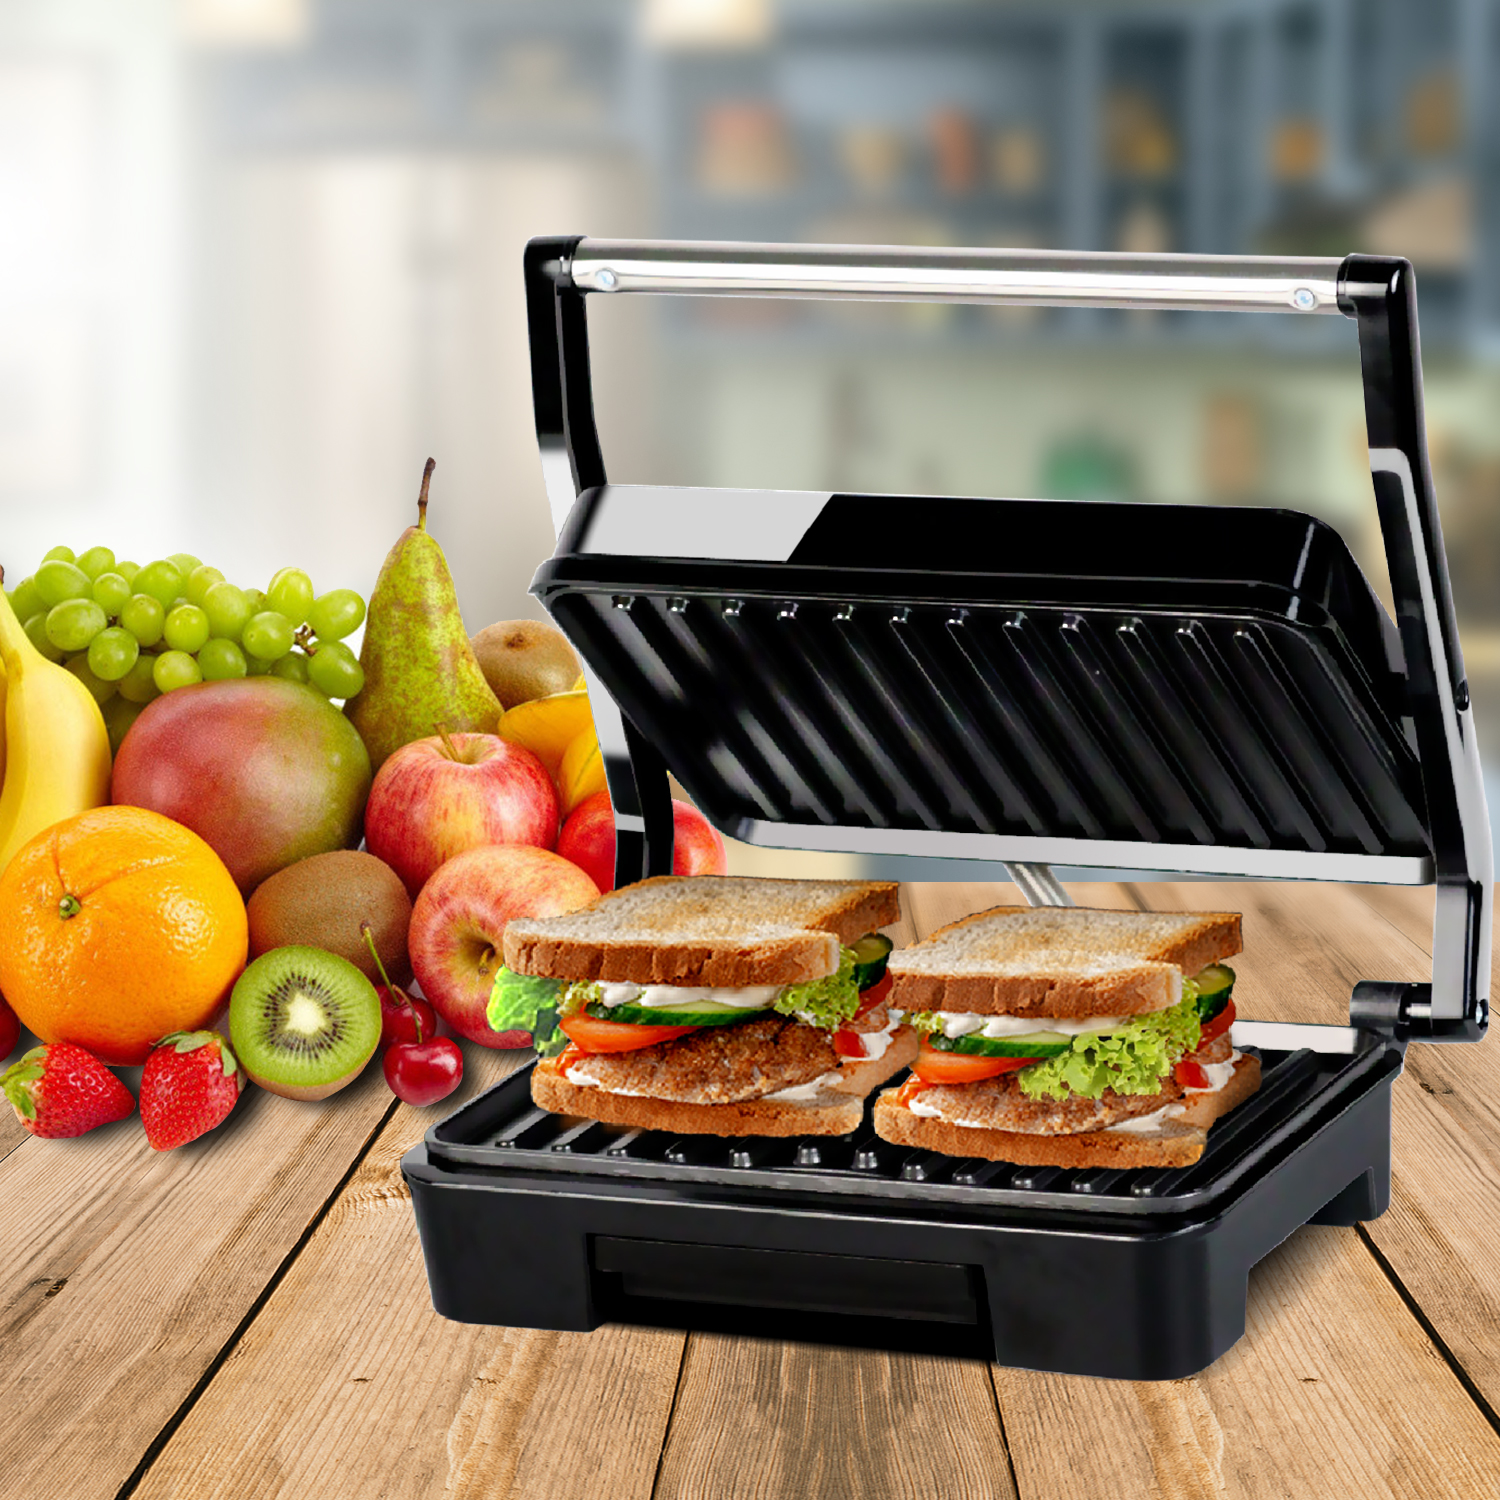 Ibell sm1515 sandwich maker with floating hinges 1000watt panini grill  toast black